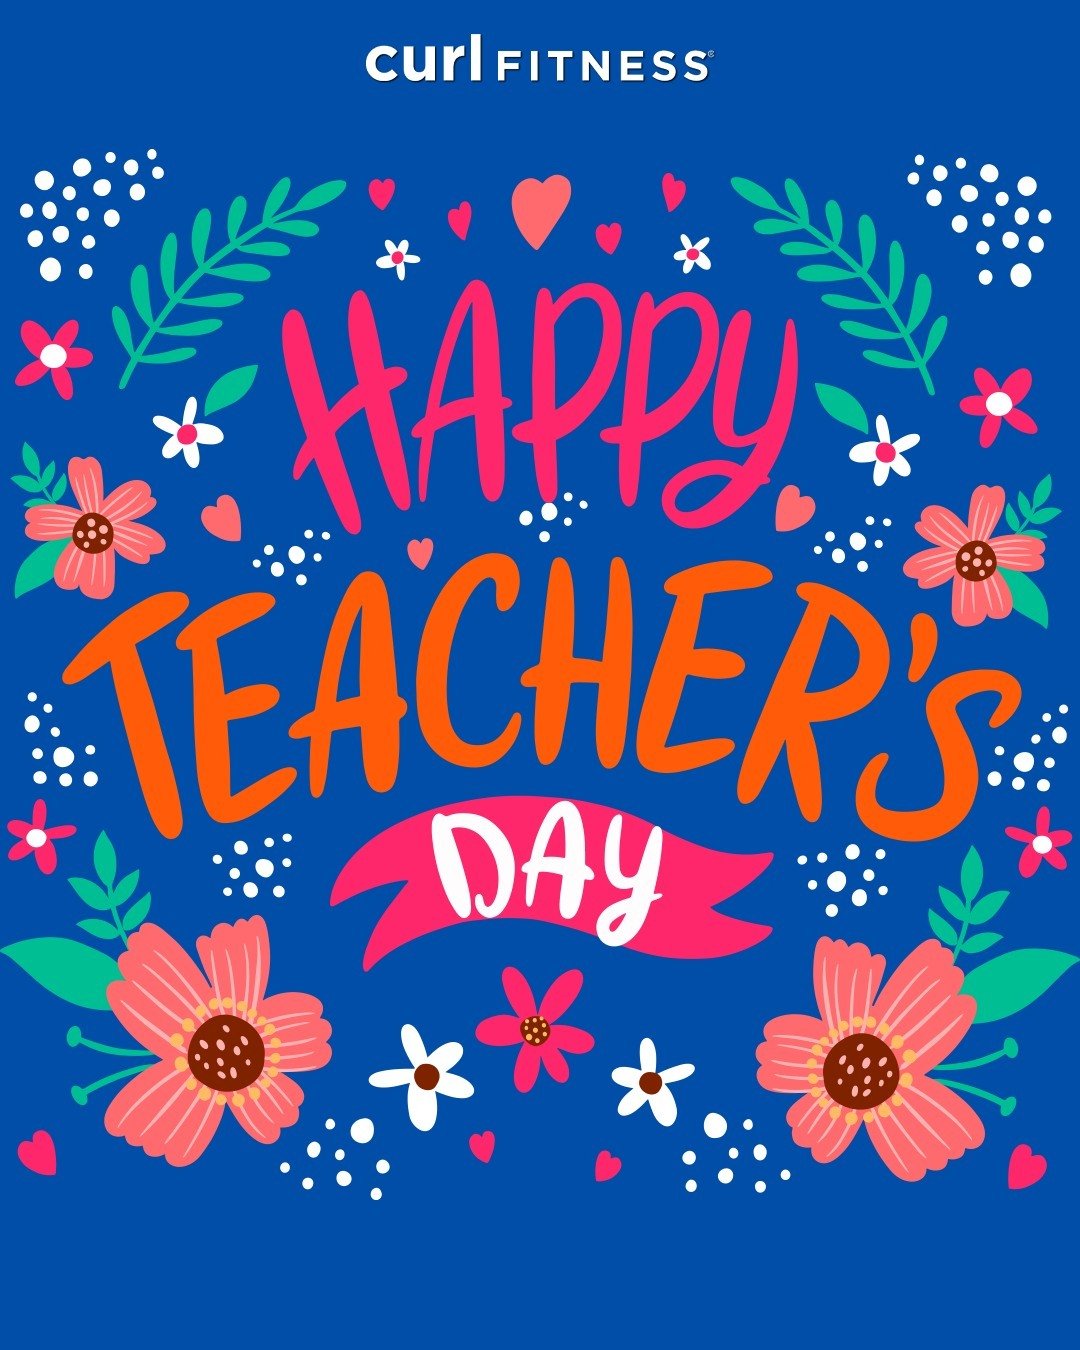 For all Teachers, we appreciate you! 🍎Don't forget to thank a Teacher today!!